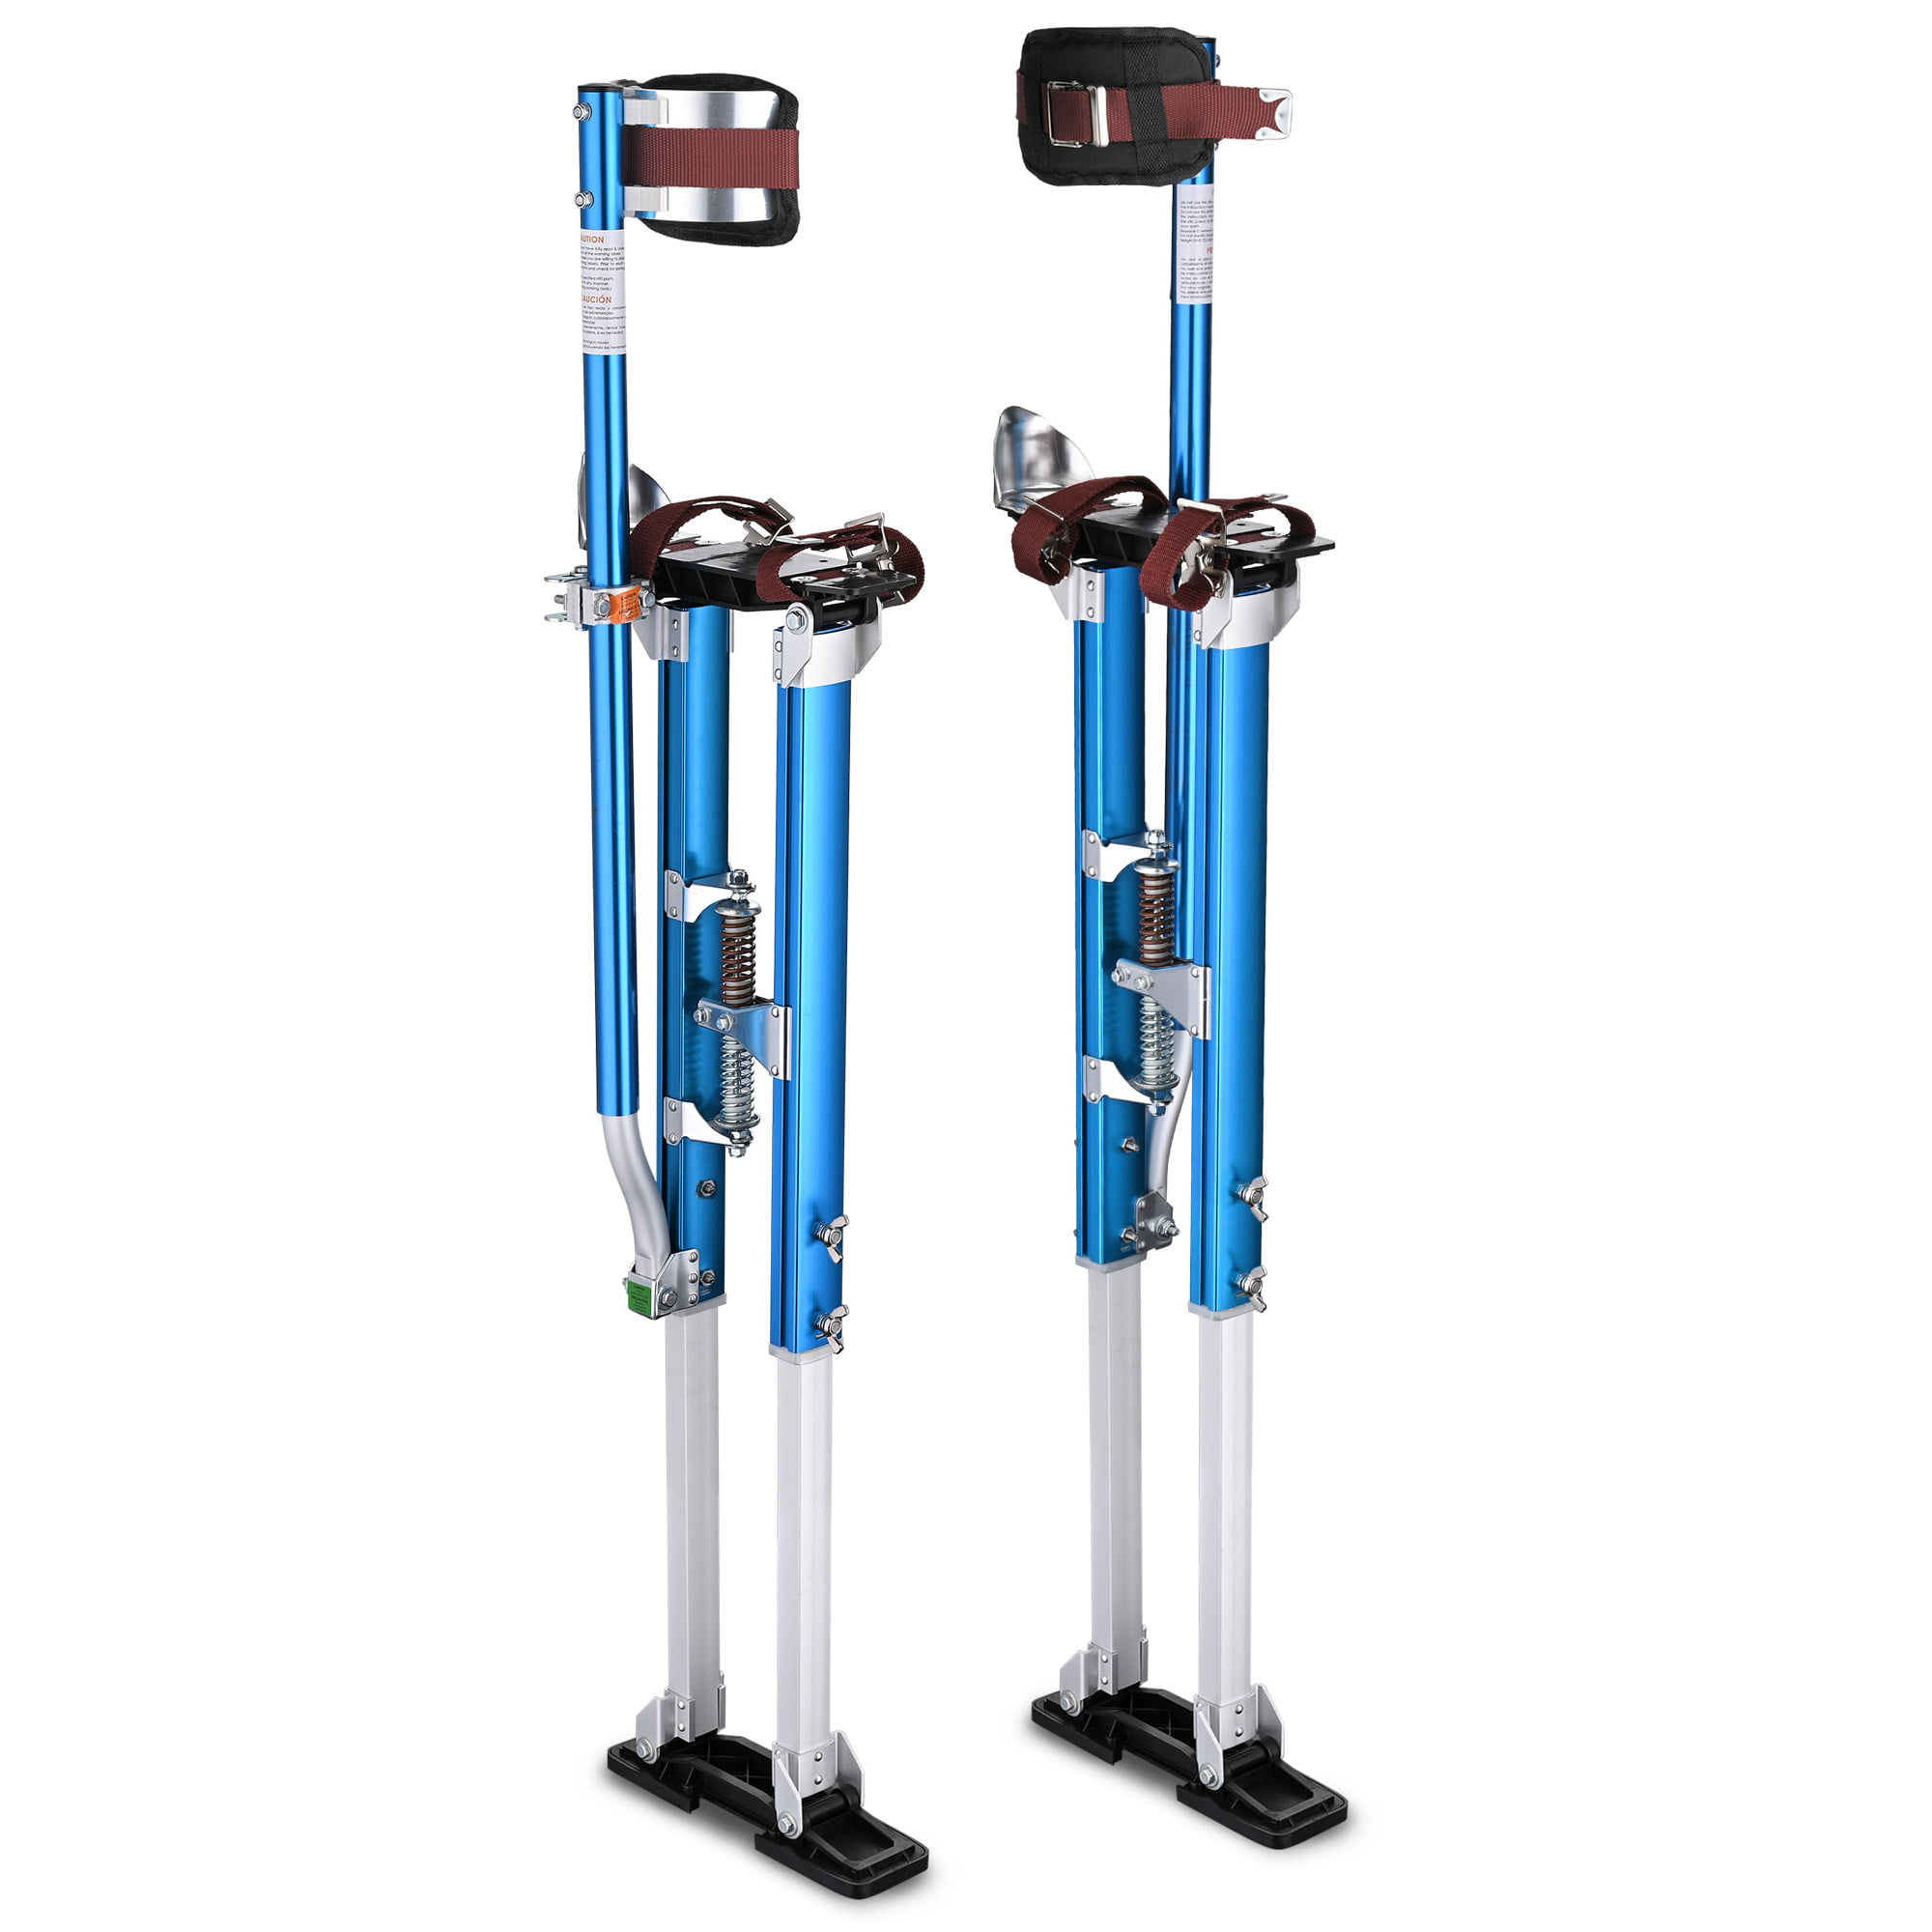 Yescom 50-64 Aluminum Drywall Stilts Height Adjustable Lifts Tool for Sheetrock Painting Painter Taping Silver 